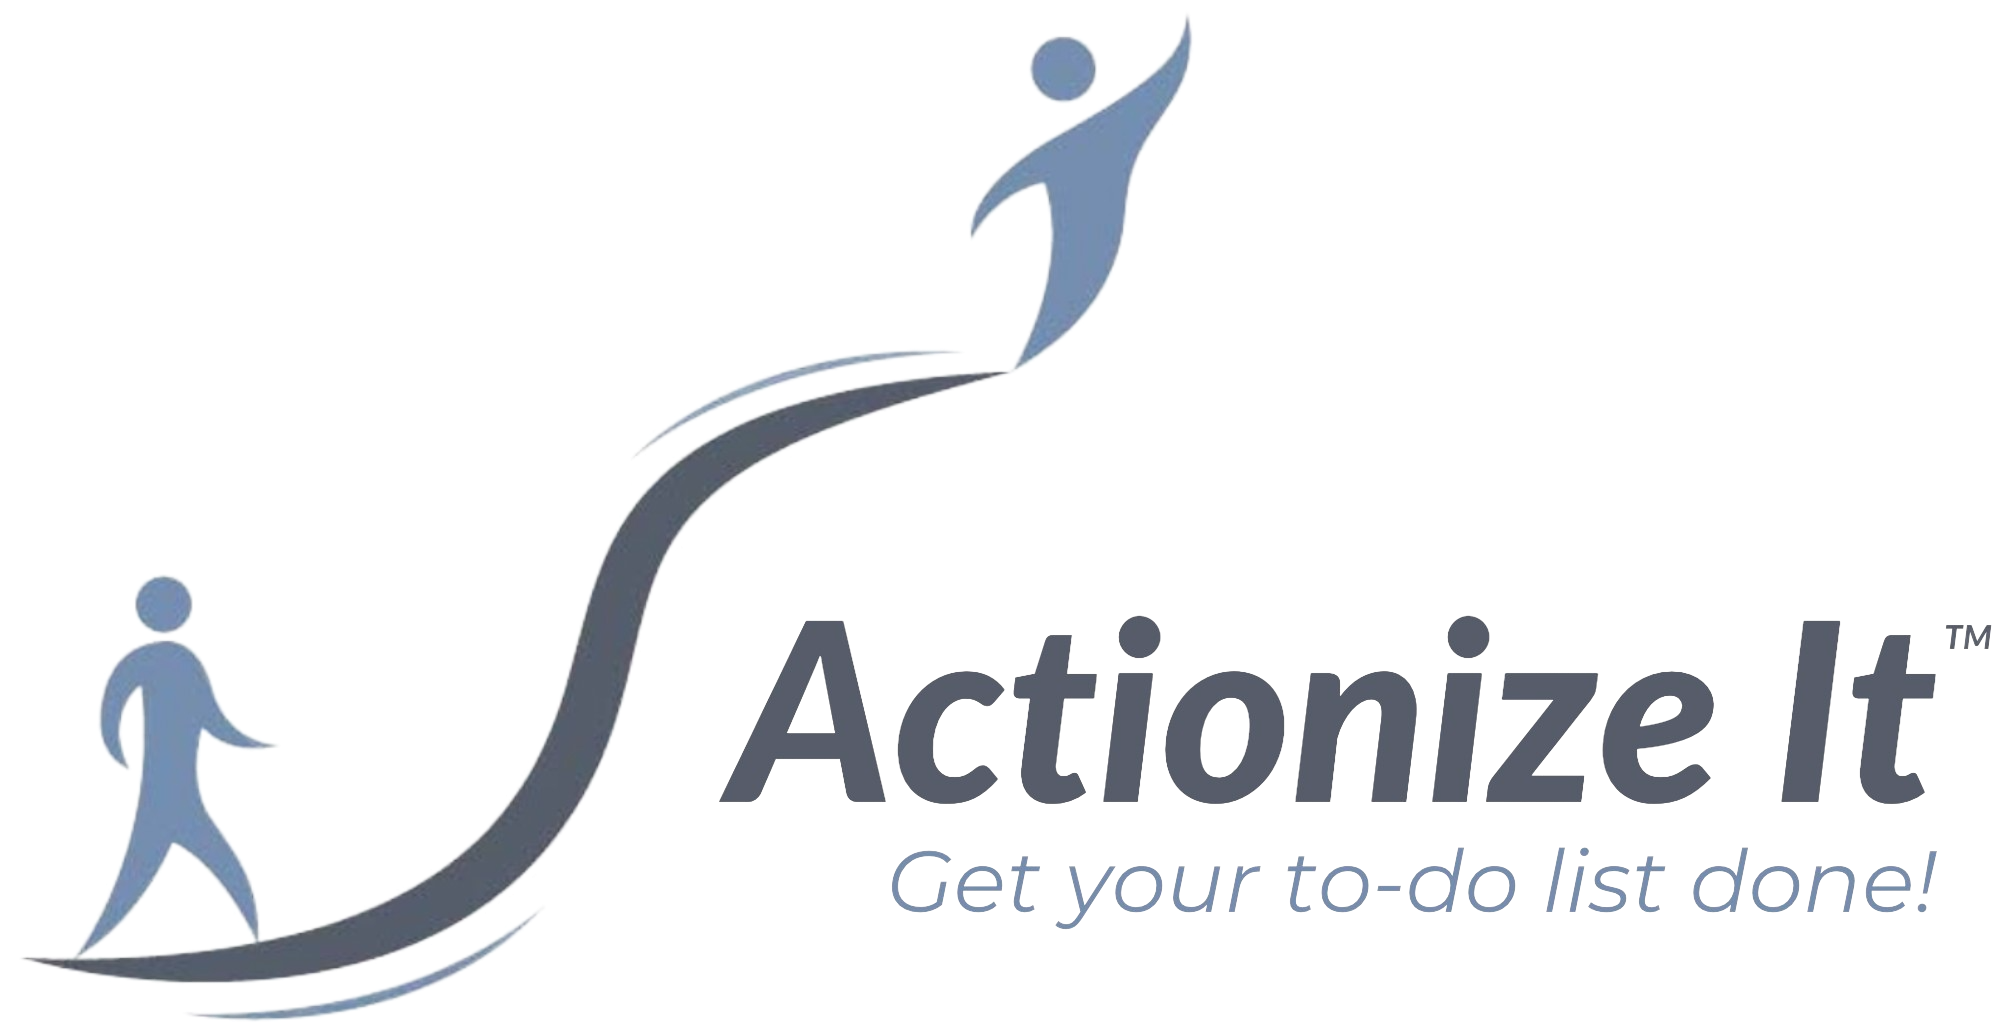 Load video: Actionize It Video Instructions